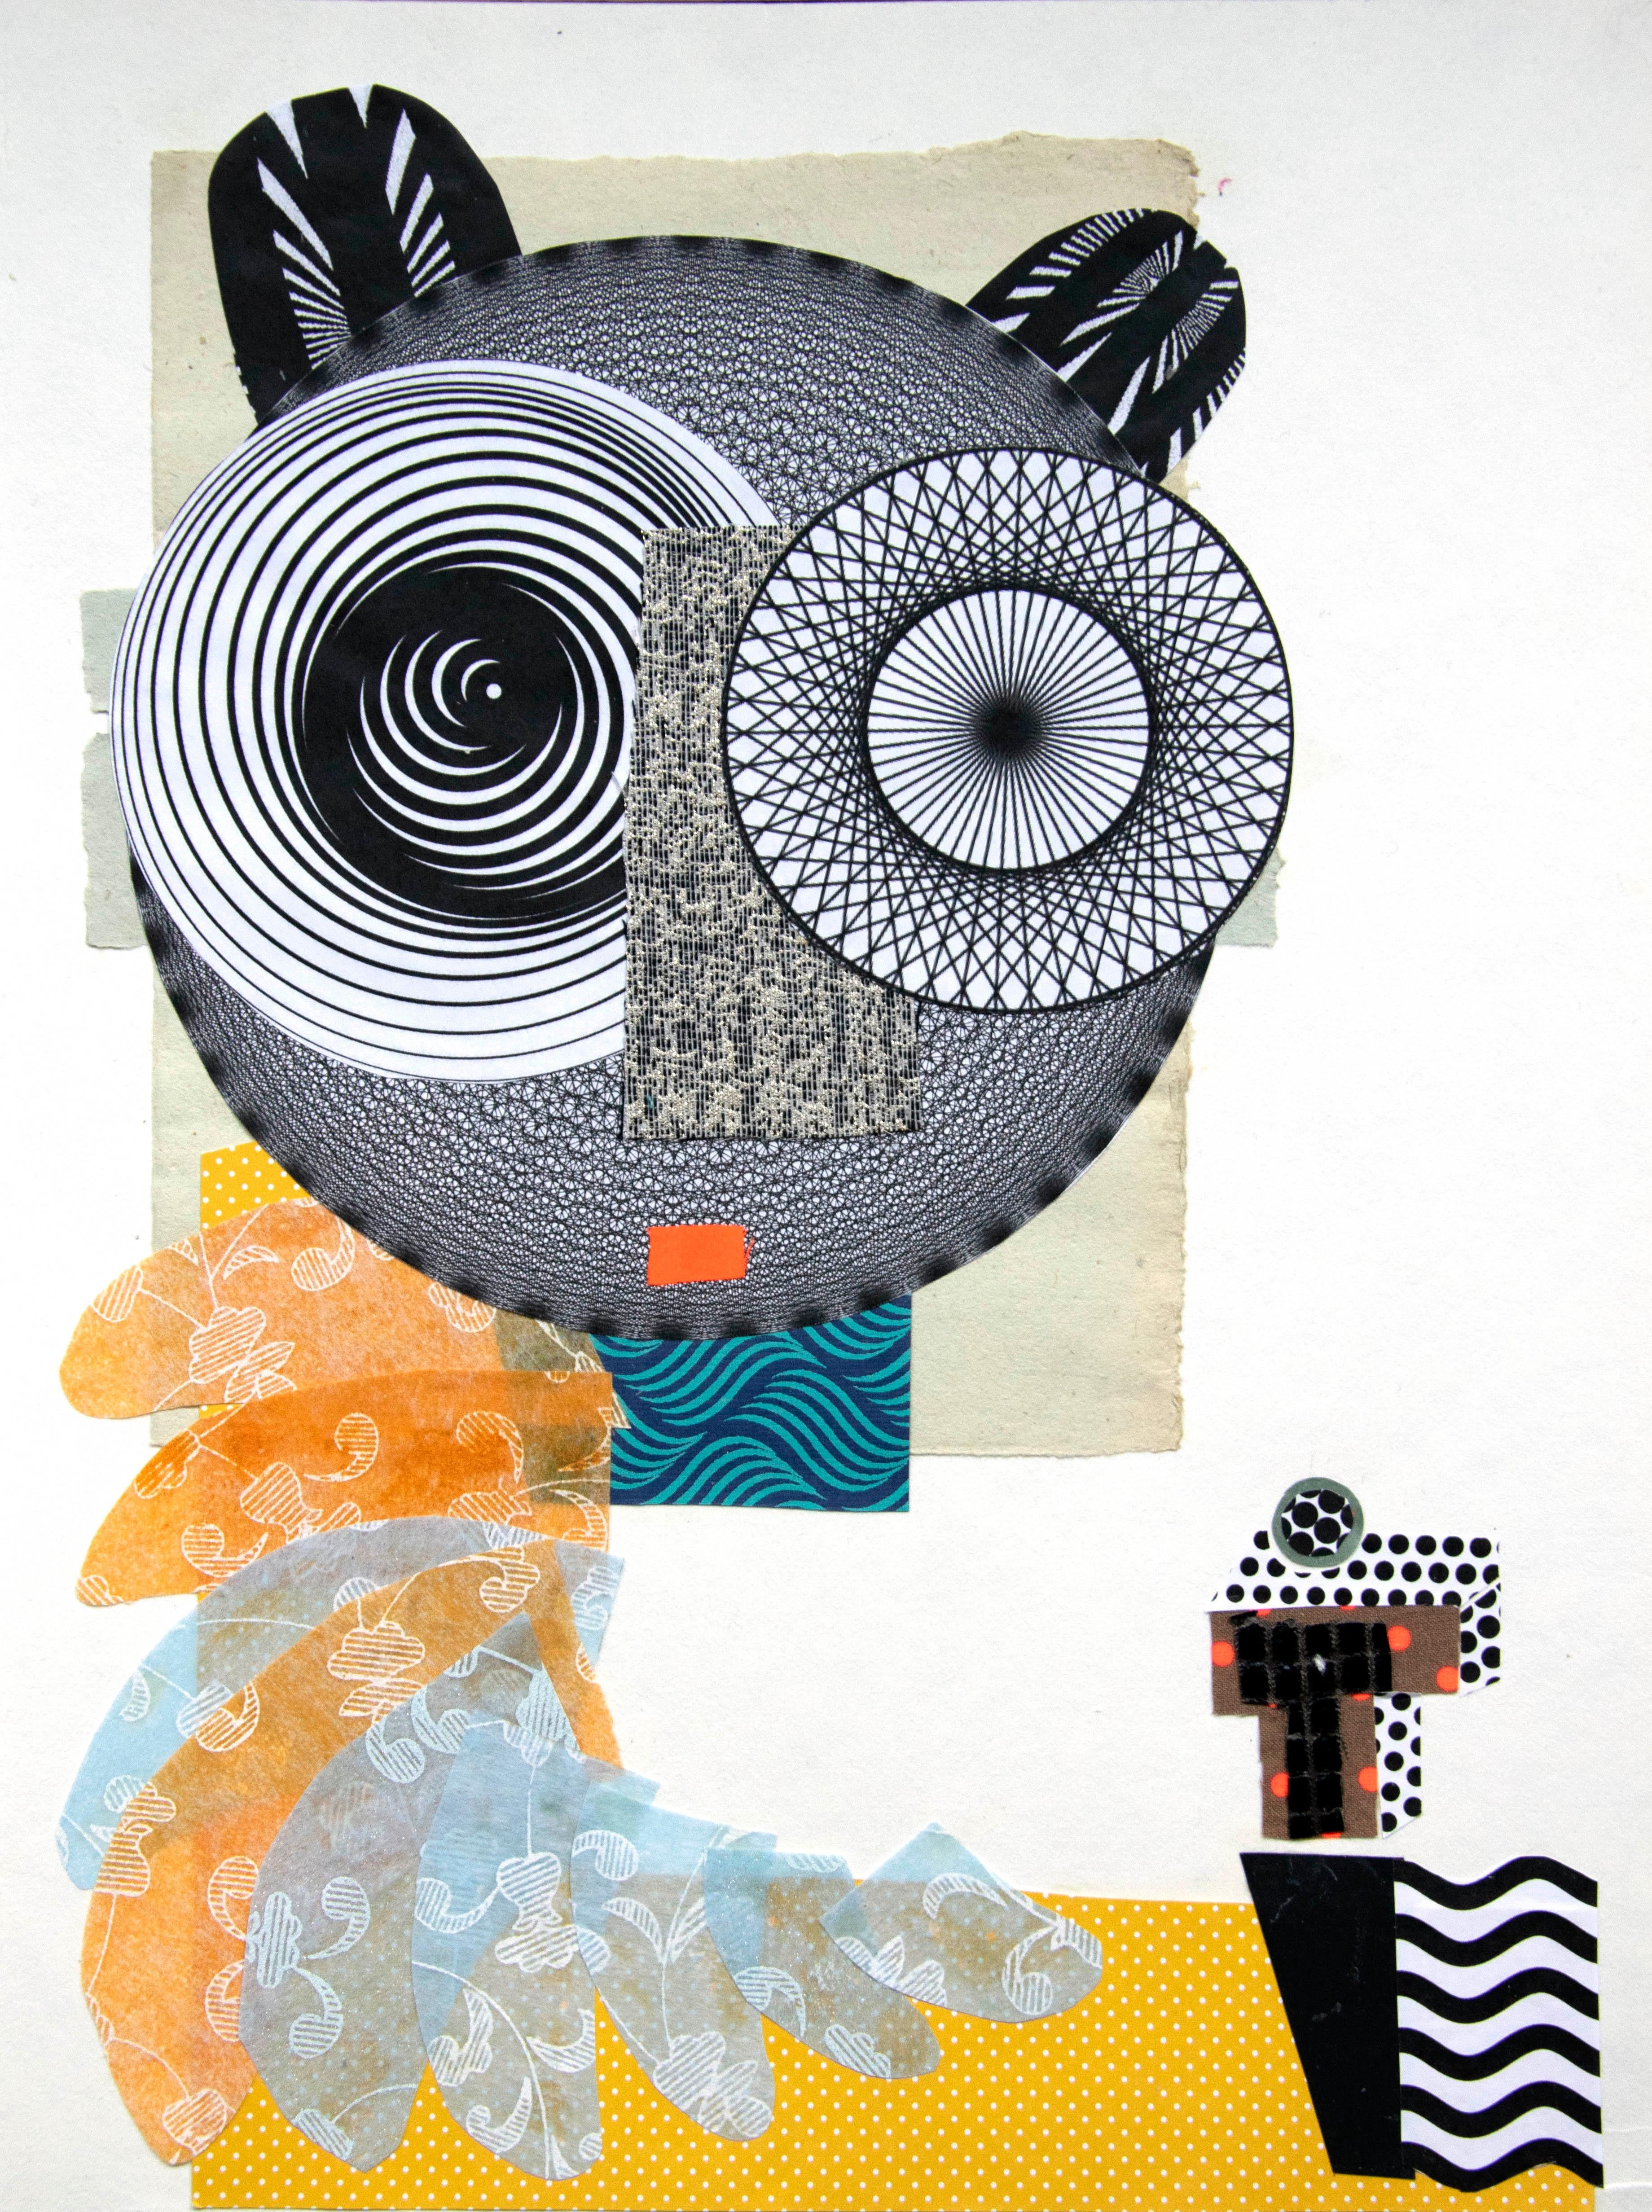 The Archangel - Contemporary Art, Collage, Funny Character, Yellow